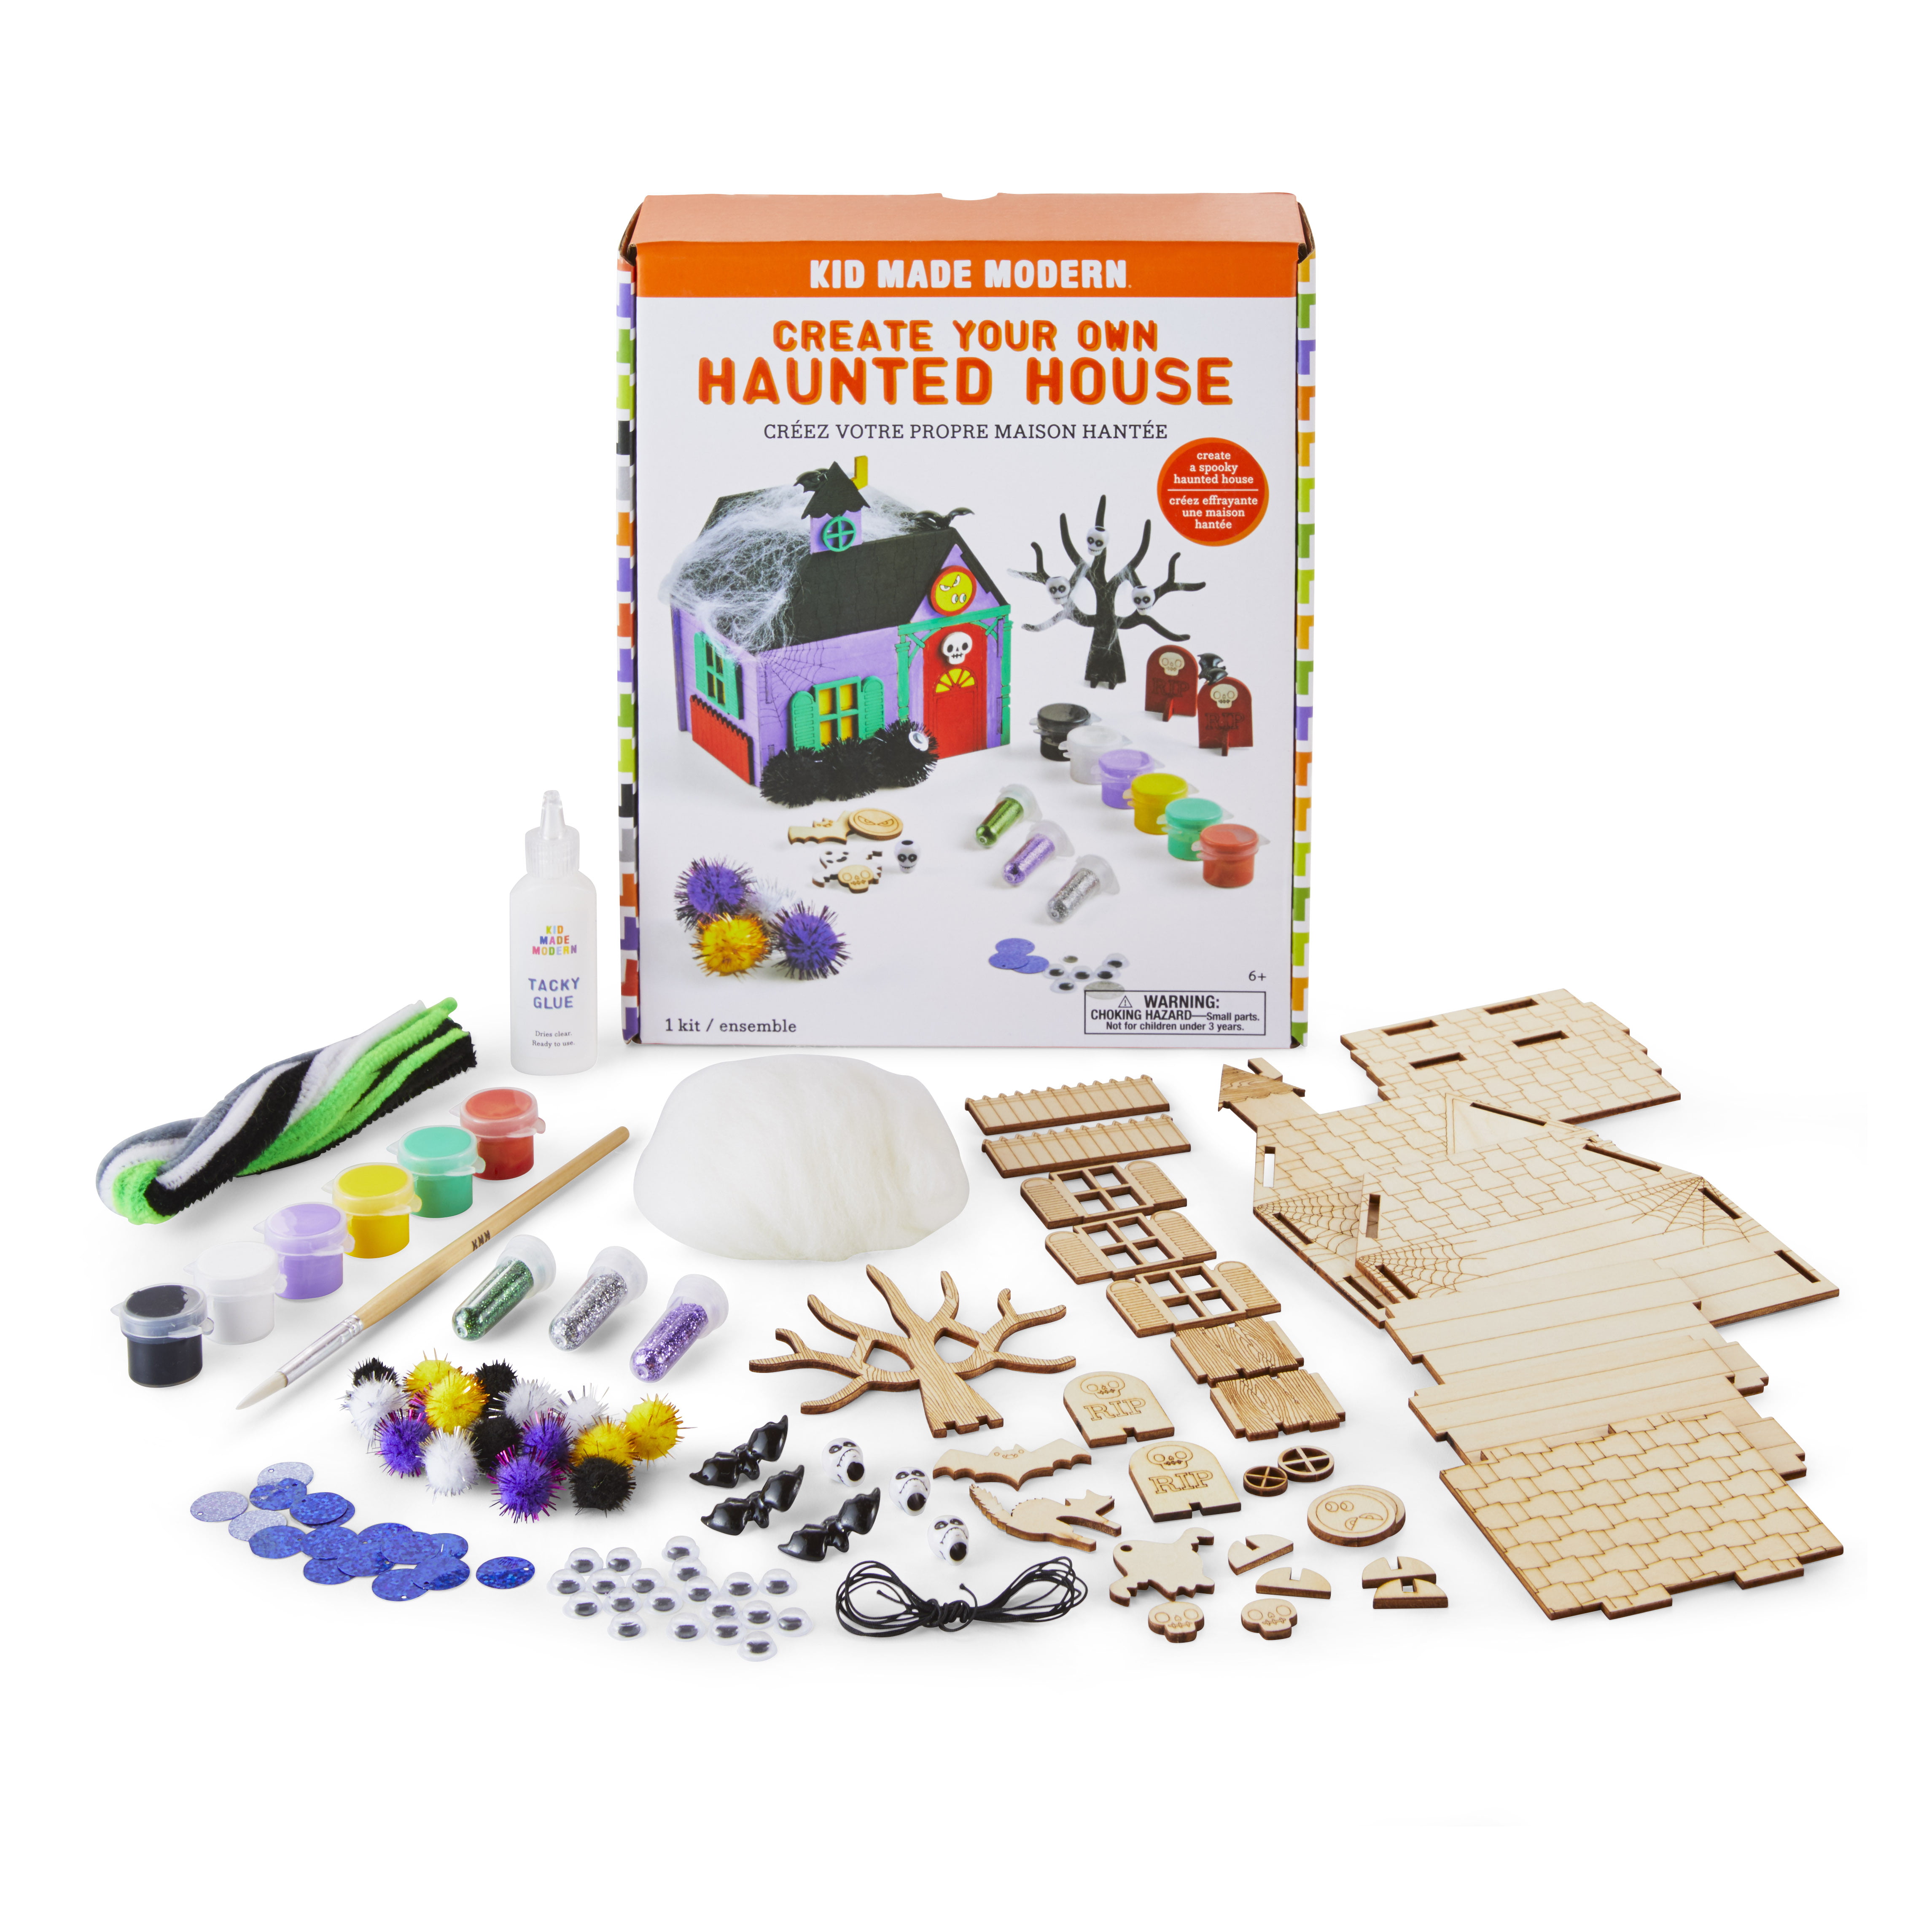 Includes Paints & Brushes ,Painting Arts and Crafts Wooden Set for Kids Age 4-12,Mini Luminous Cabin House Christmas Tree Craft Wooden House Kits for Christmas,Make a Christmas Cabin House Kit